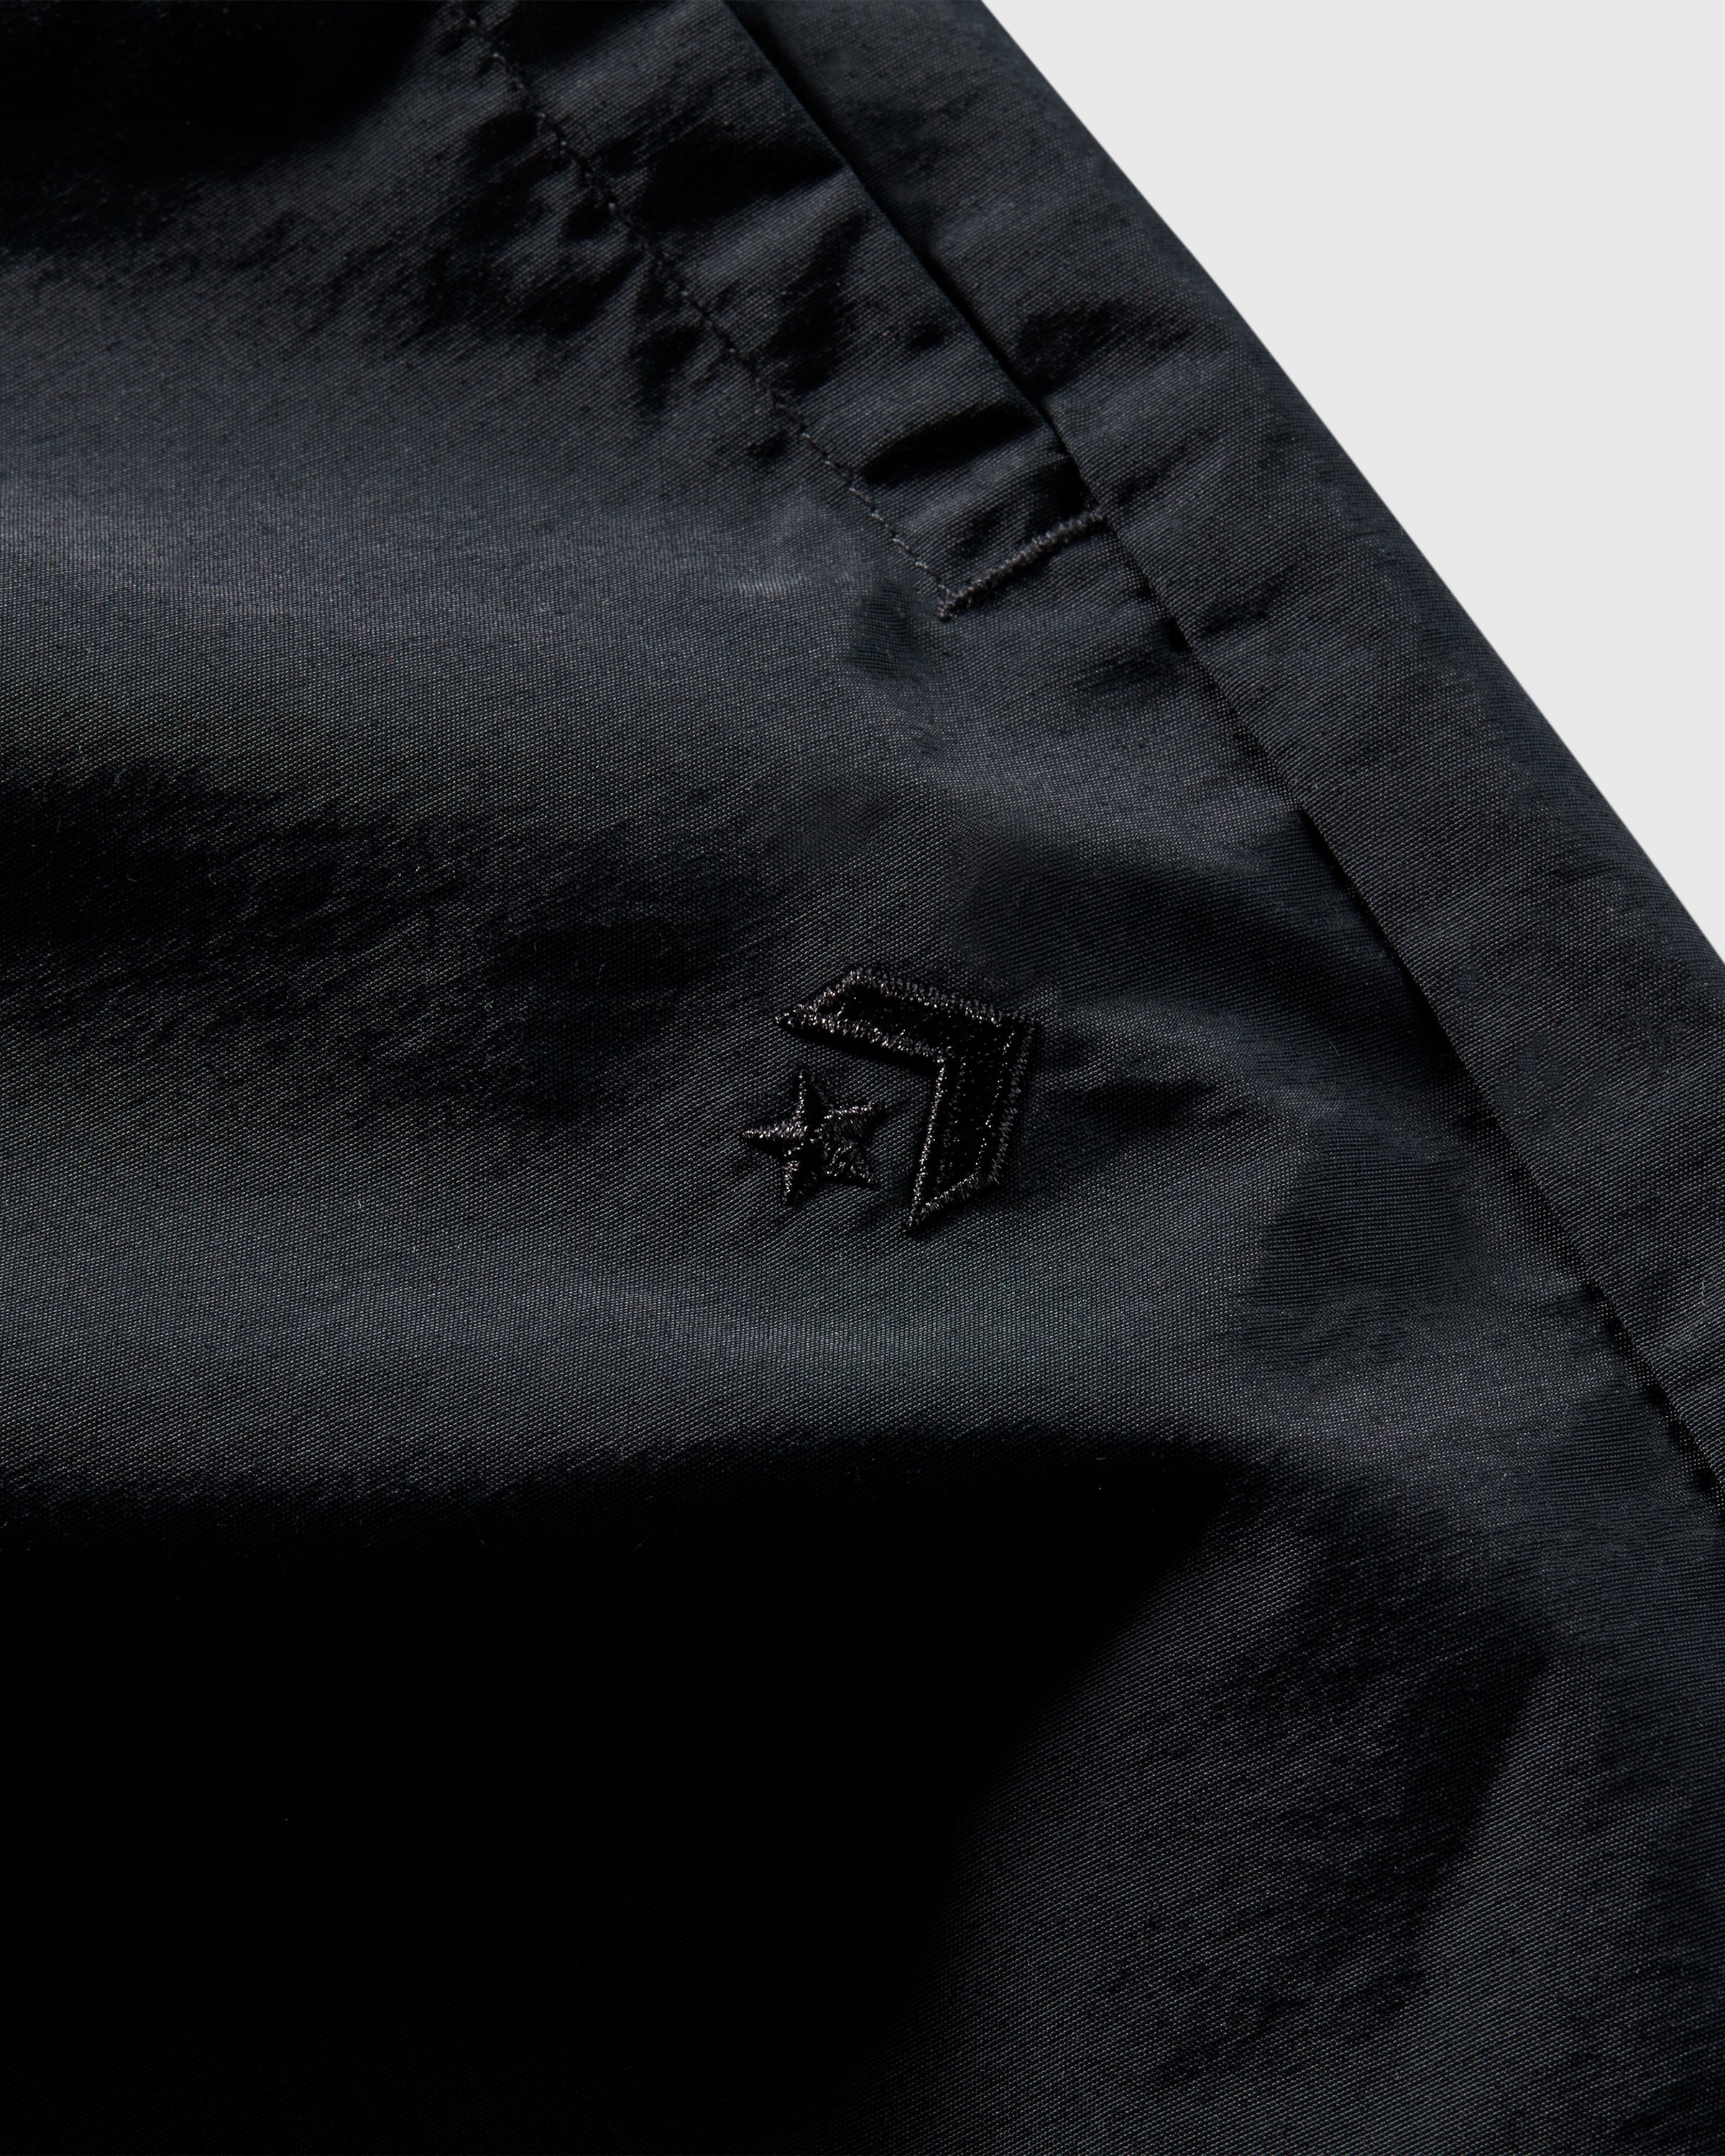 Converse x Barriers – Court Ready Cutter Shorts Black - Active Shorts - Black - Image 5